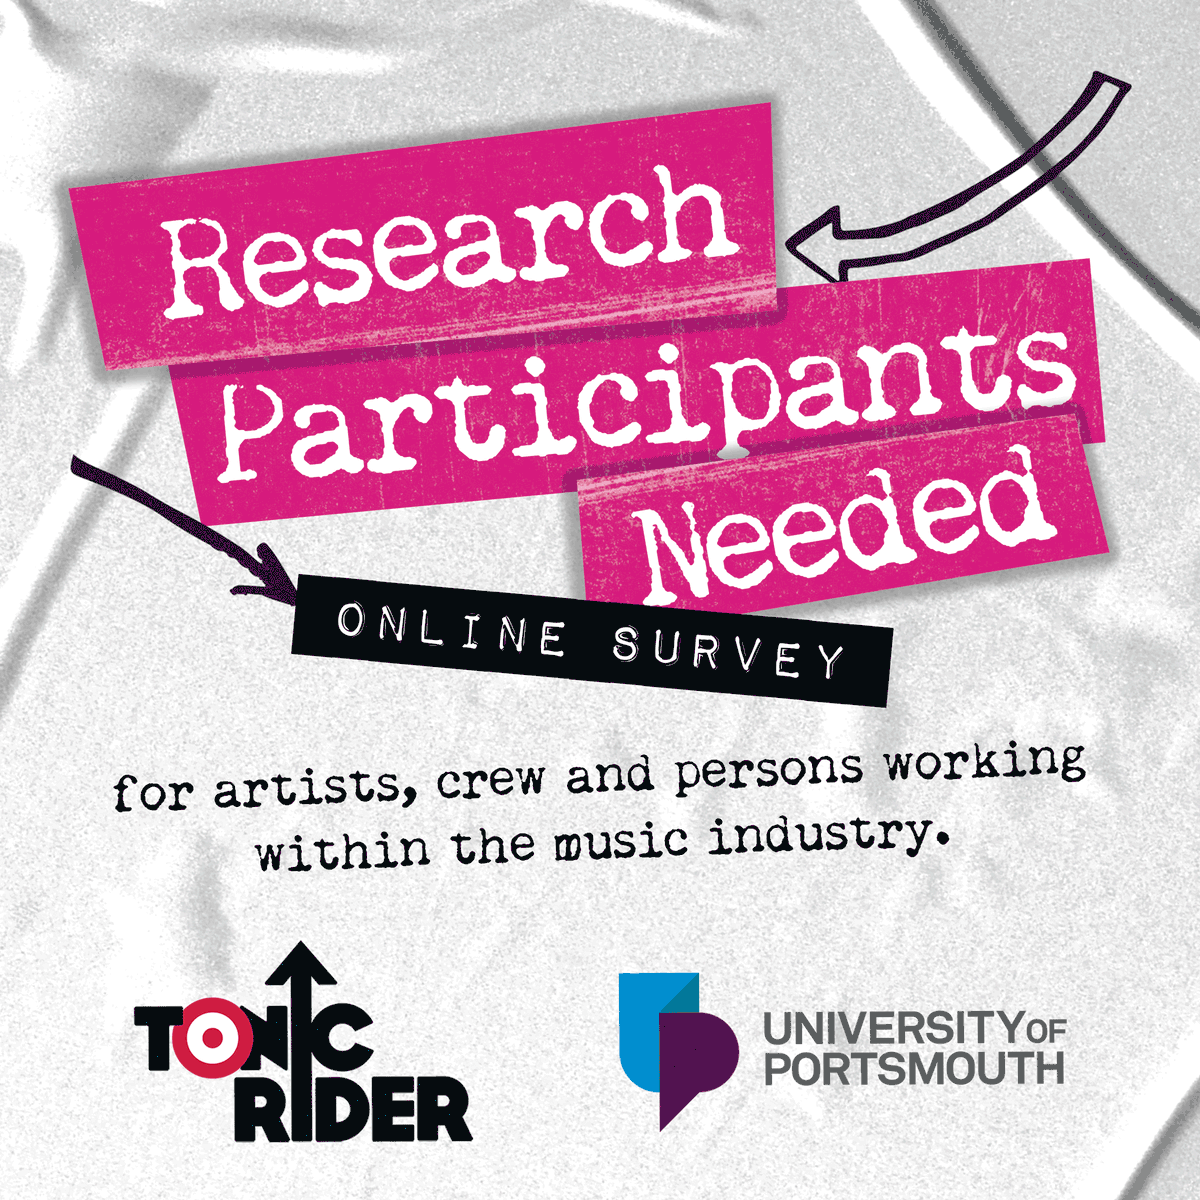 Calling all artists, crew and industry professionals! working in music!

Survey on mental health in the music industry - with @portsmouthuni

To take part >  tonicmusic.co.uk/research 

#TonicRider #Research #MentalHealth #Wellbeing #Music